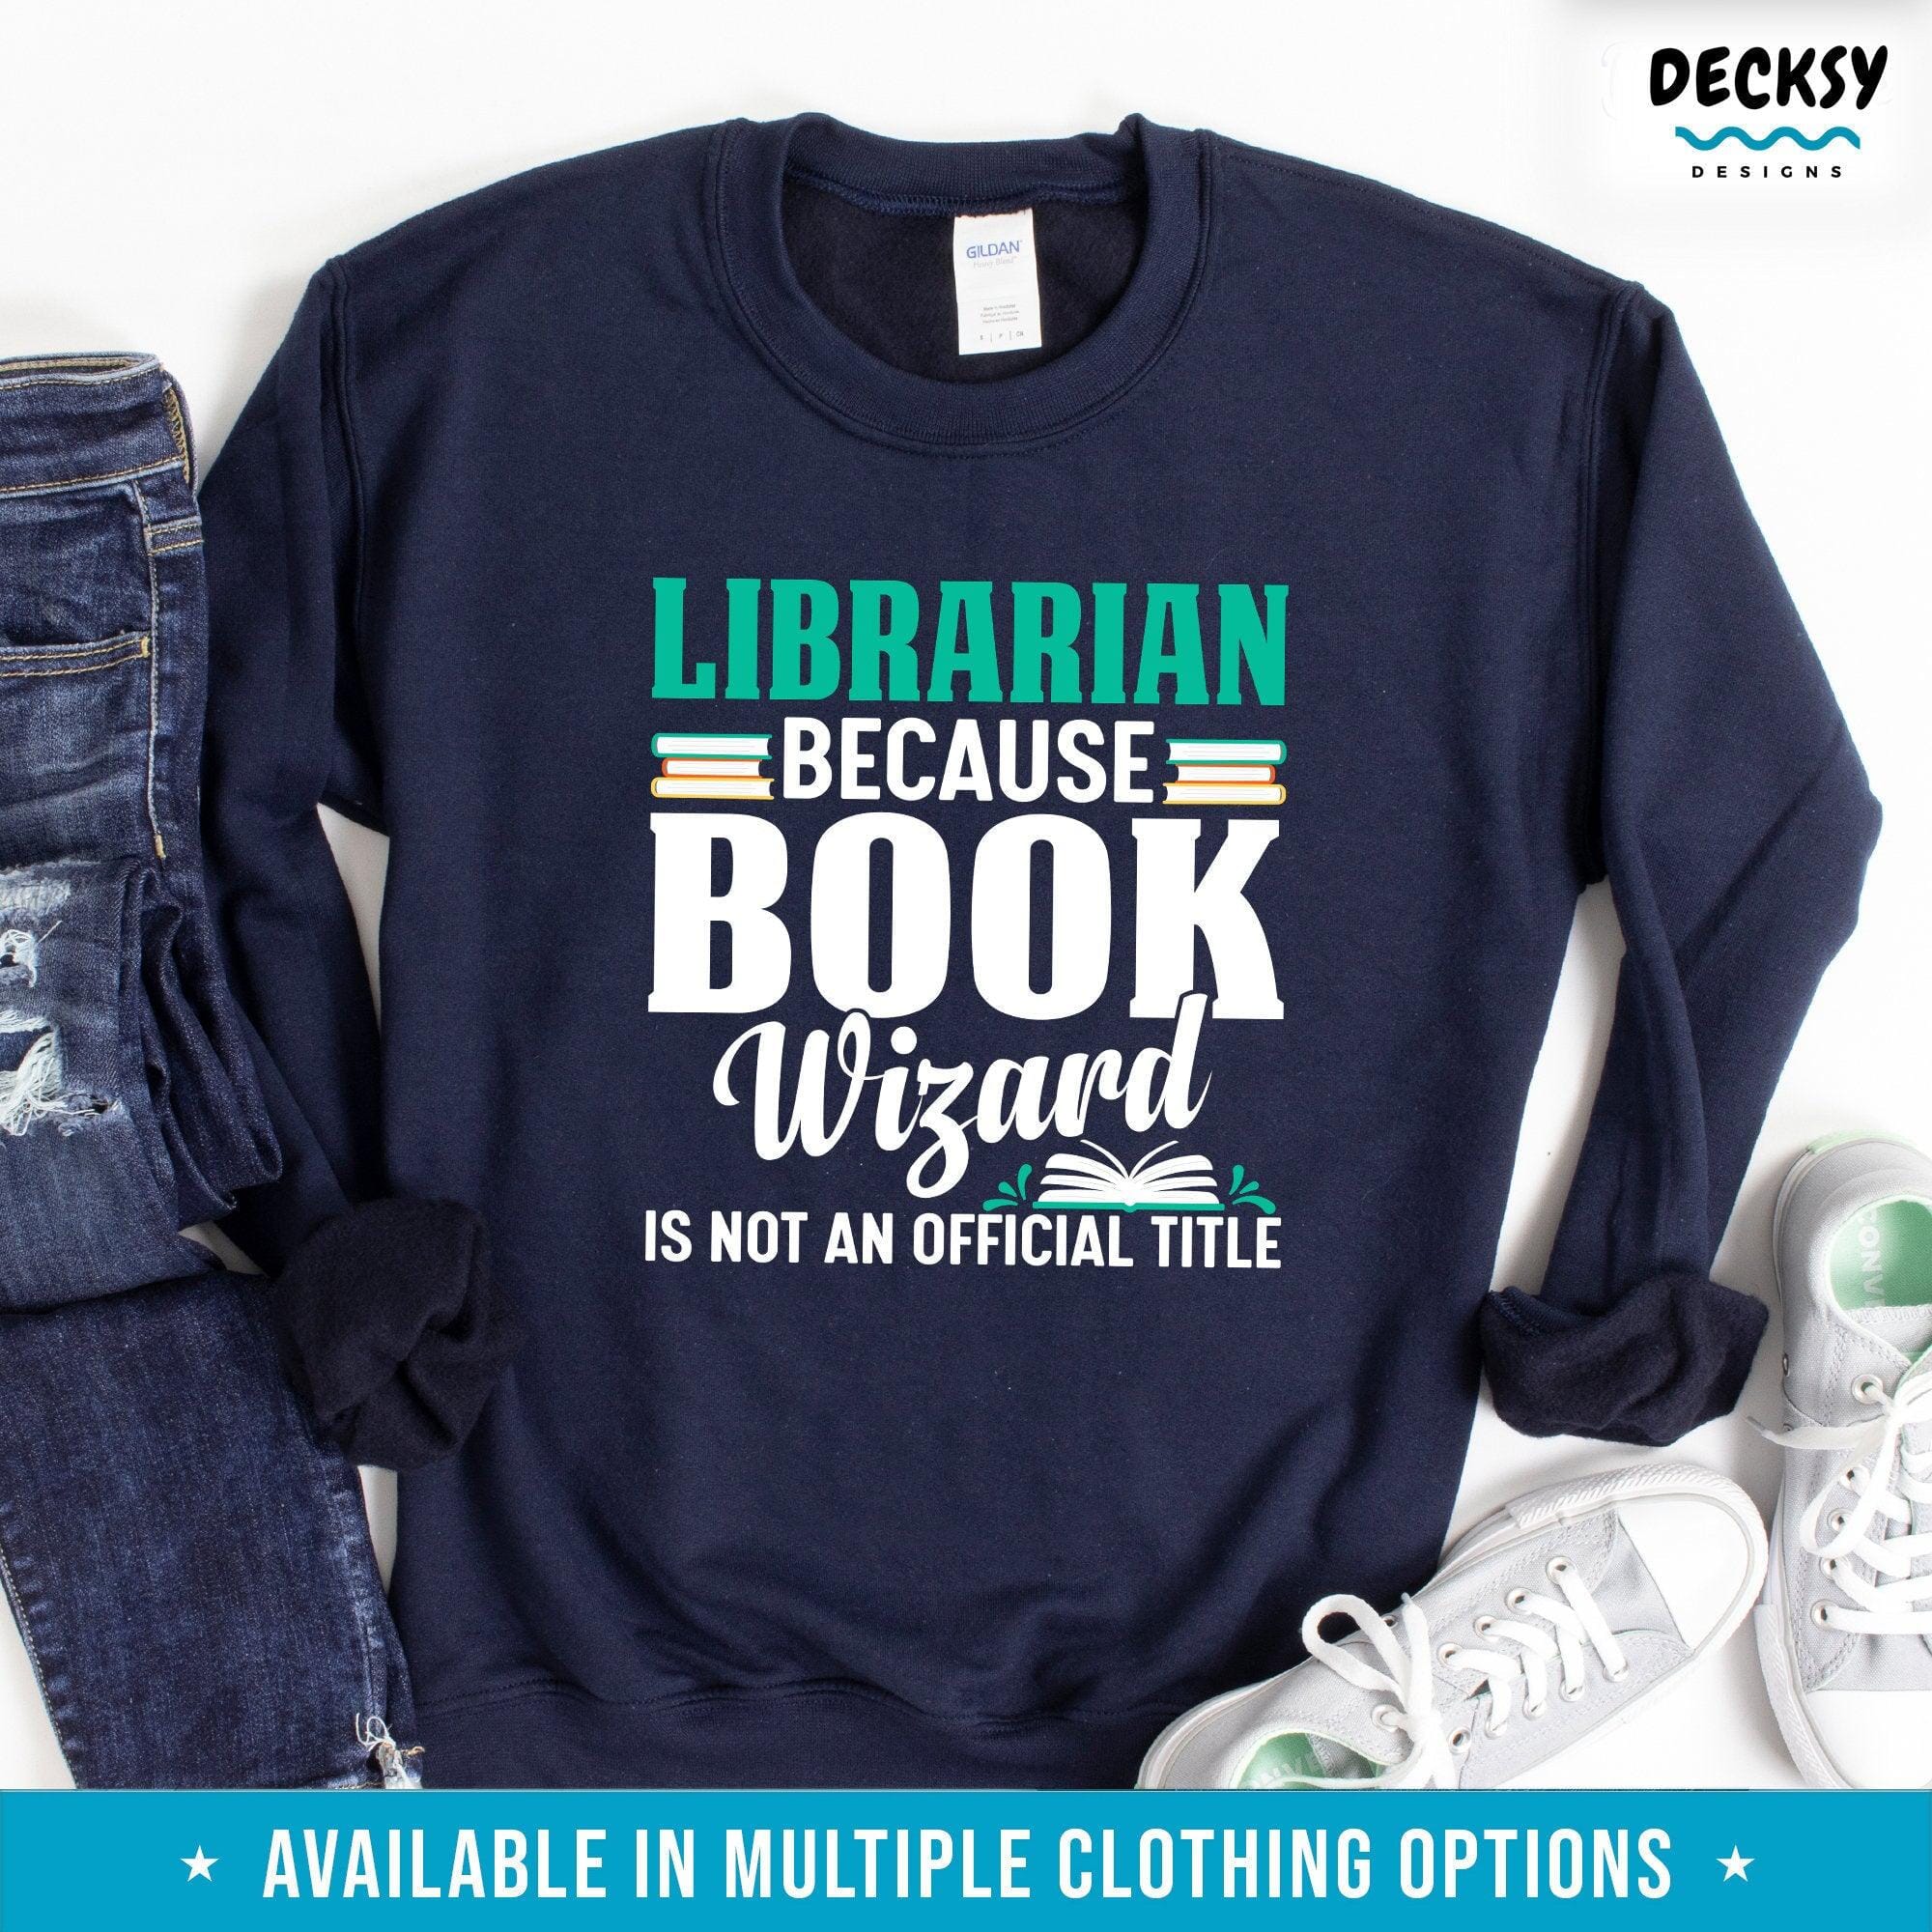 Librarian Tshirt, Funny Library Teacher Gift-Clothing:Gender-Neutral Adult Clothing:Tops & Tees:T-shirts:Graphic Tees-DecksyDesigns